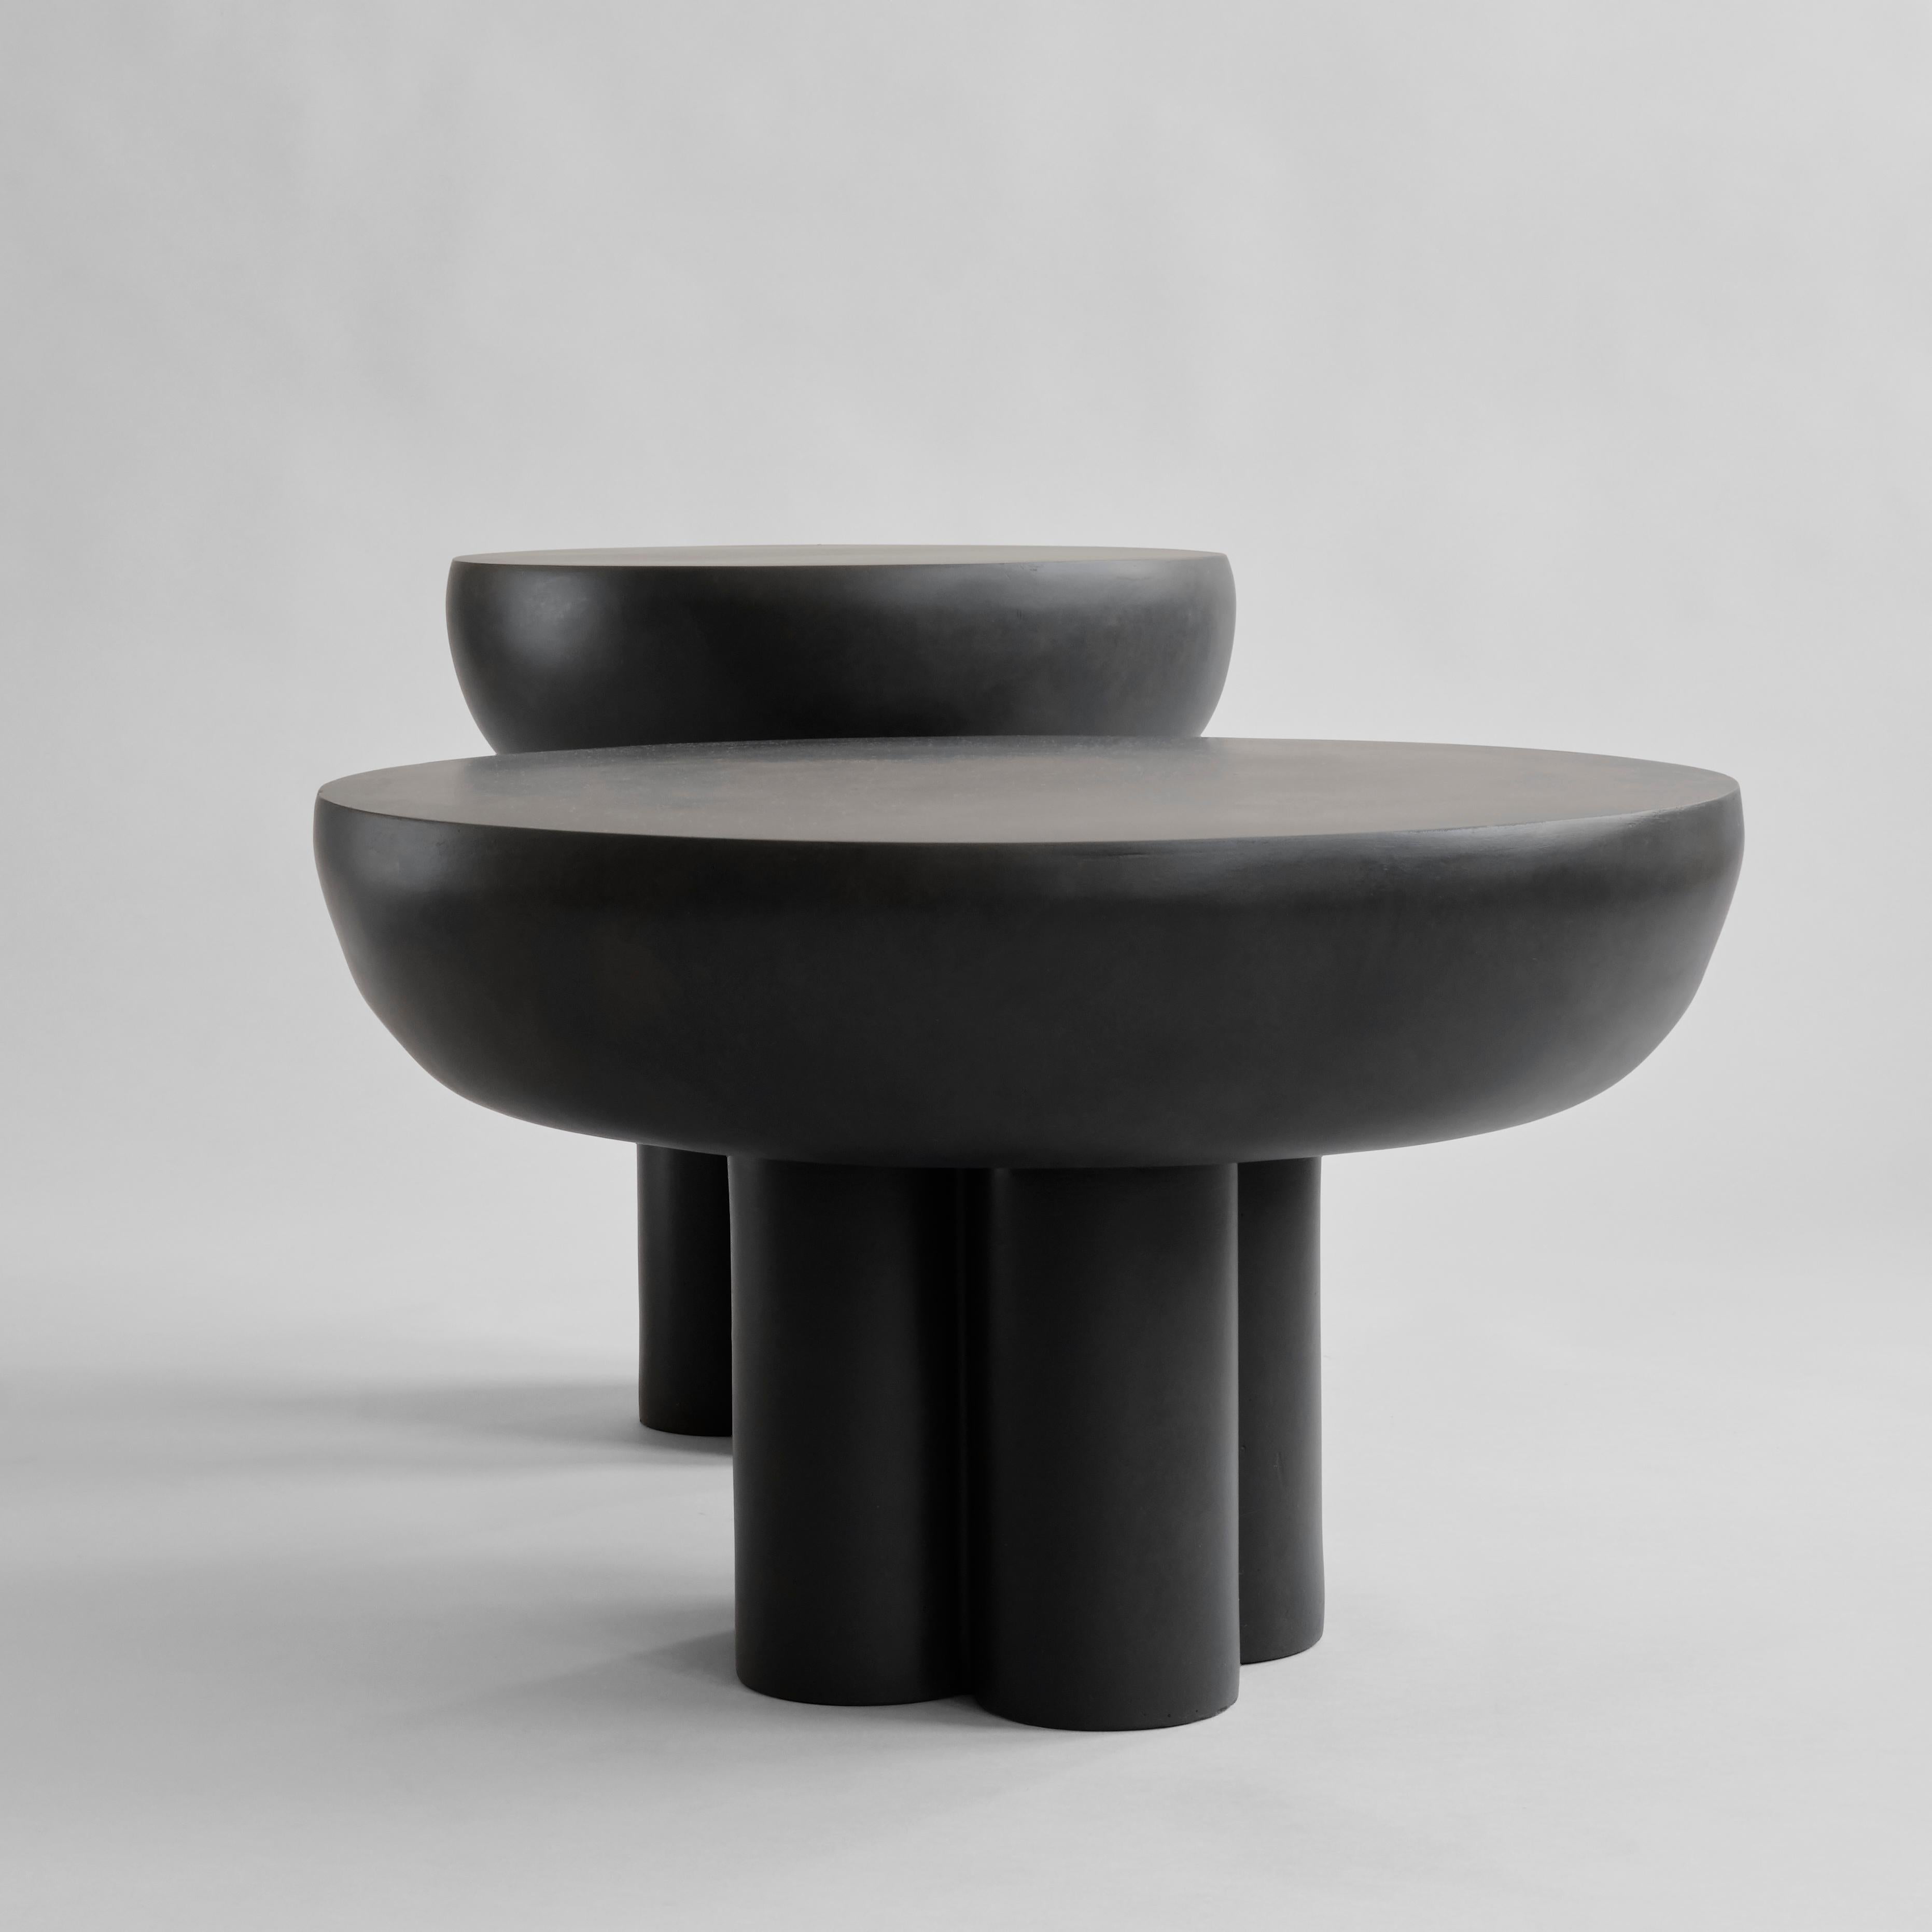 Burned Black Crown Table Low by 101 Copenhagen
Designed by Kristian Sofus Hansen & Tommy Hyldahl
Dimensions: L65 / W65 /H41 CM
Materials: Aluminum

The collection of tables entitled Crown is cast in one piece formed as a circular tabletop carried by